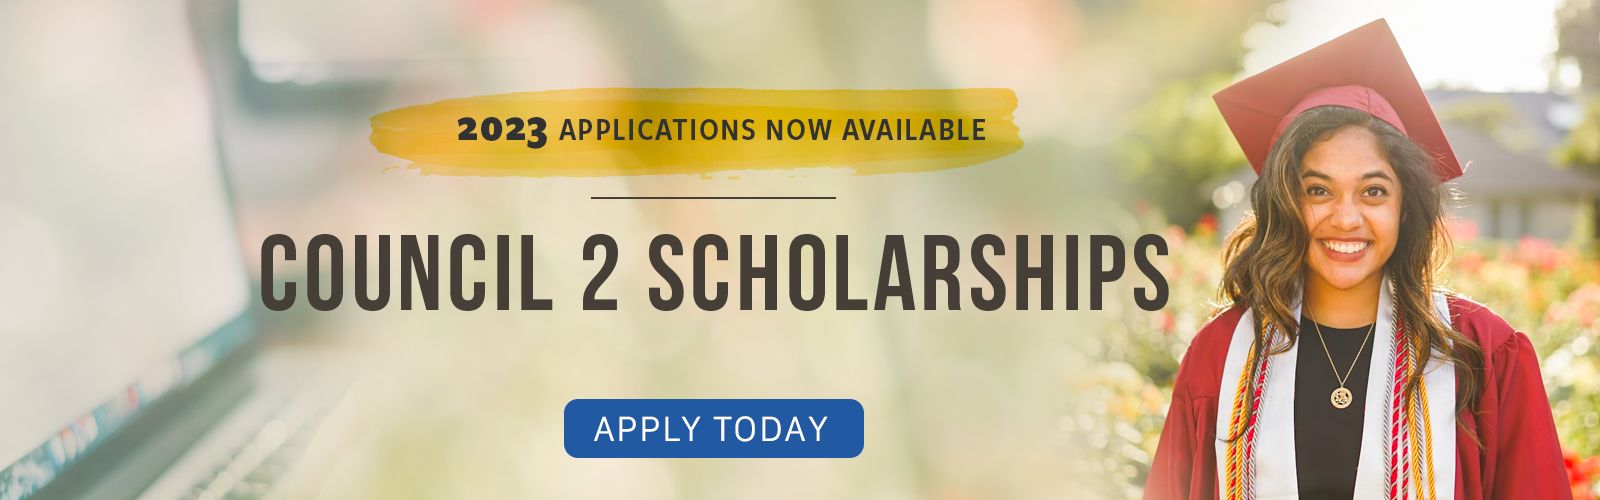 Apply now for Council 2 scholarships 